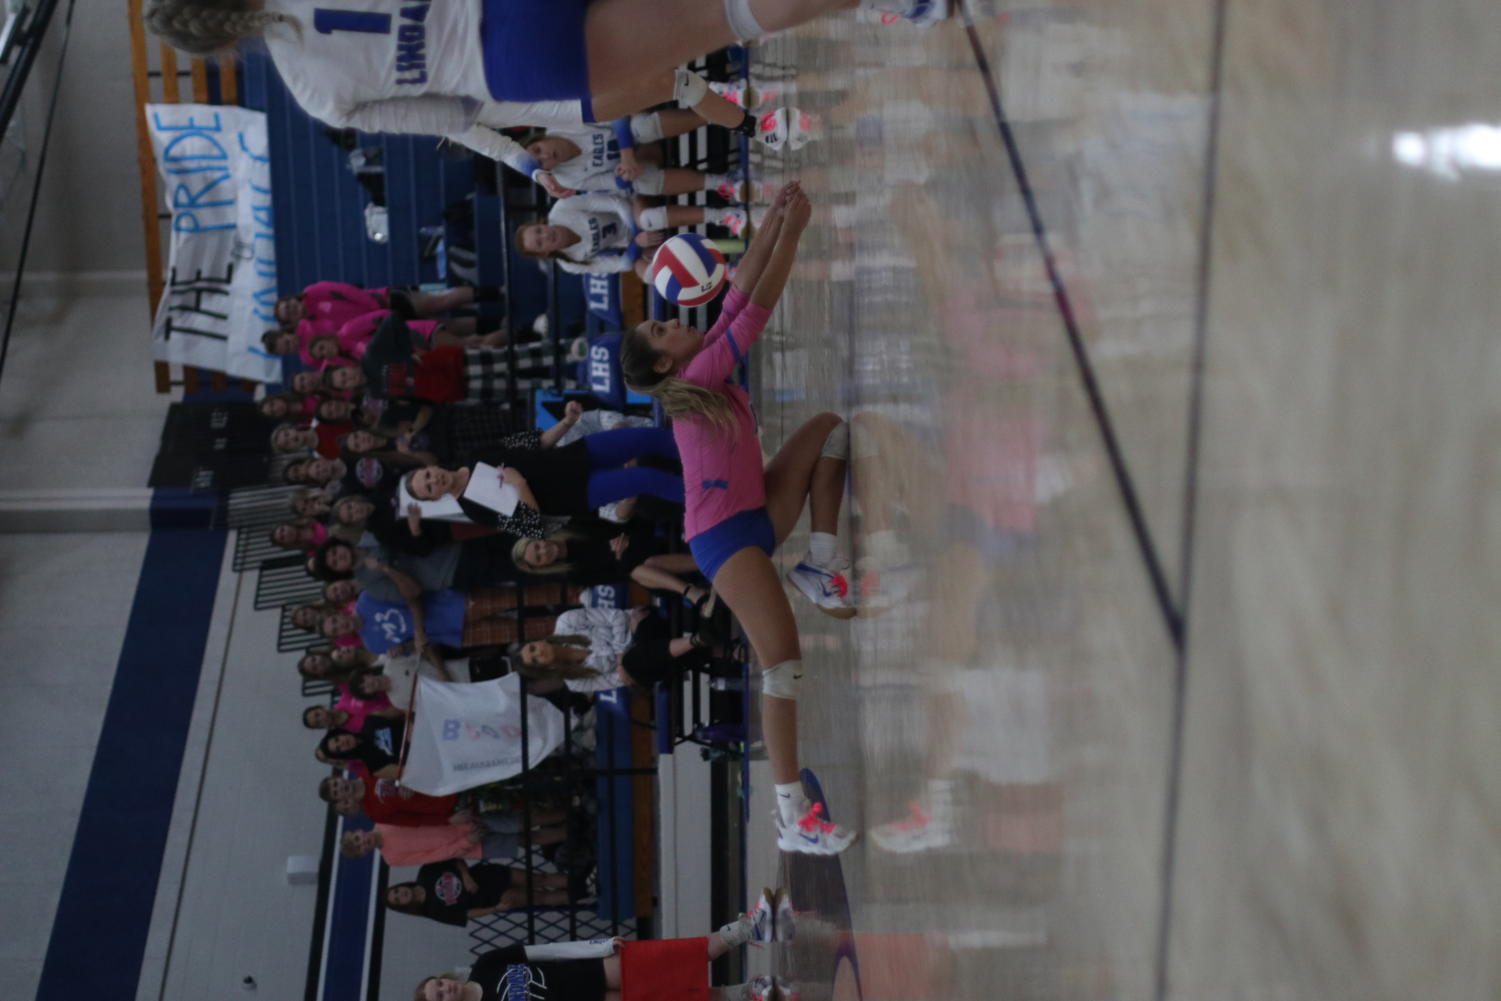 Senior Alondra Romero dives for the ball during the volleyball match.